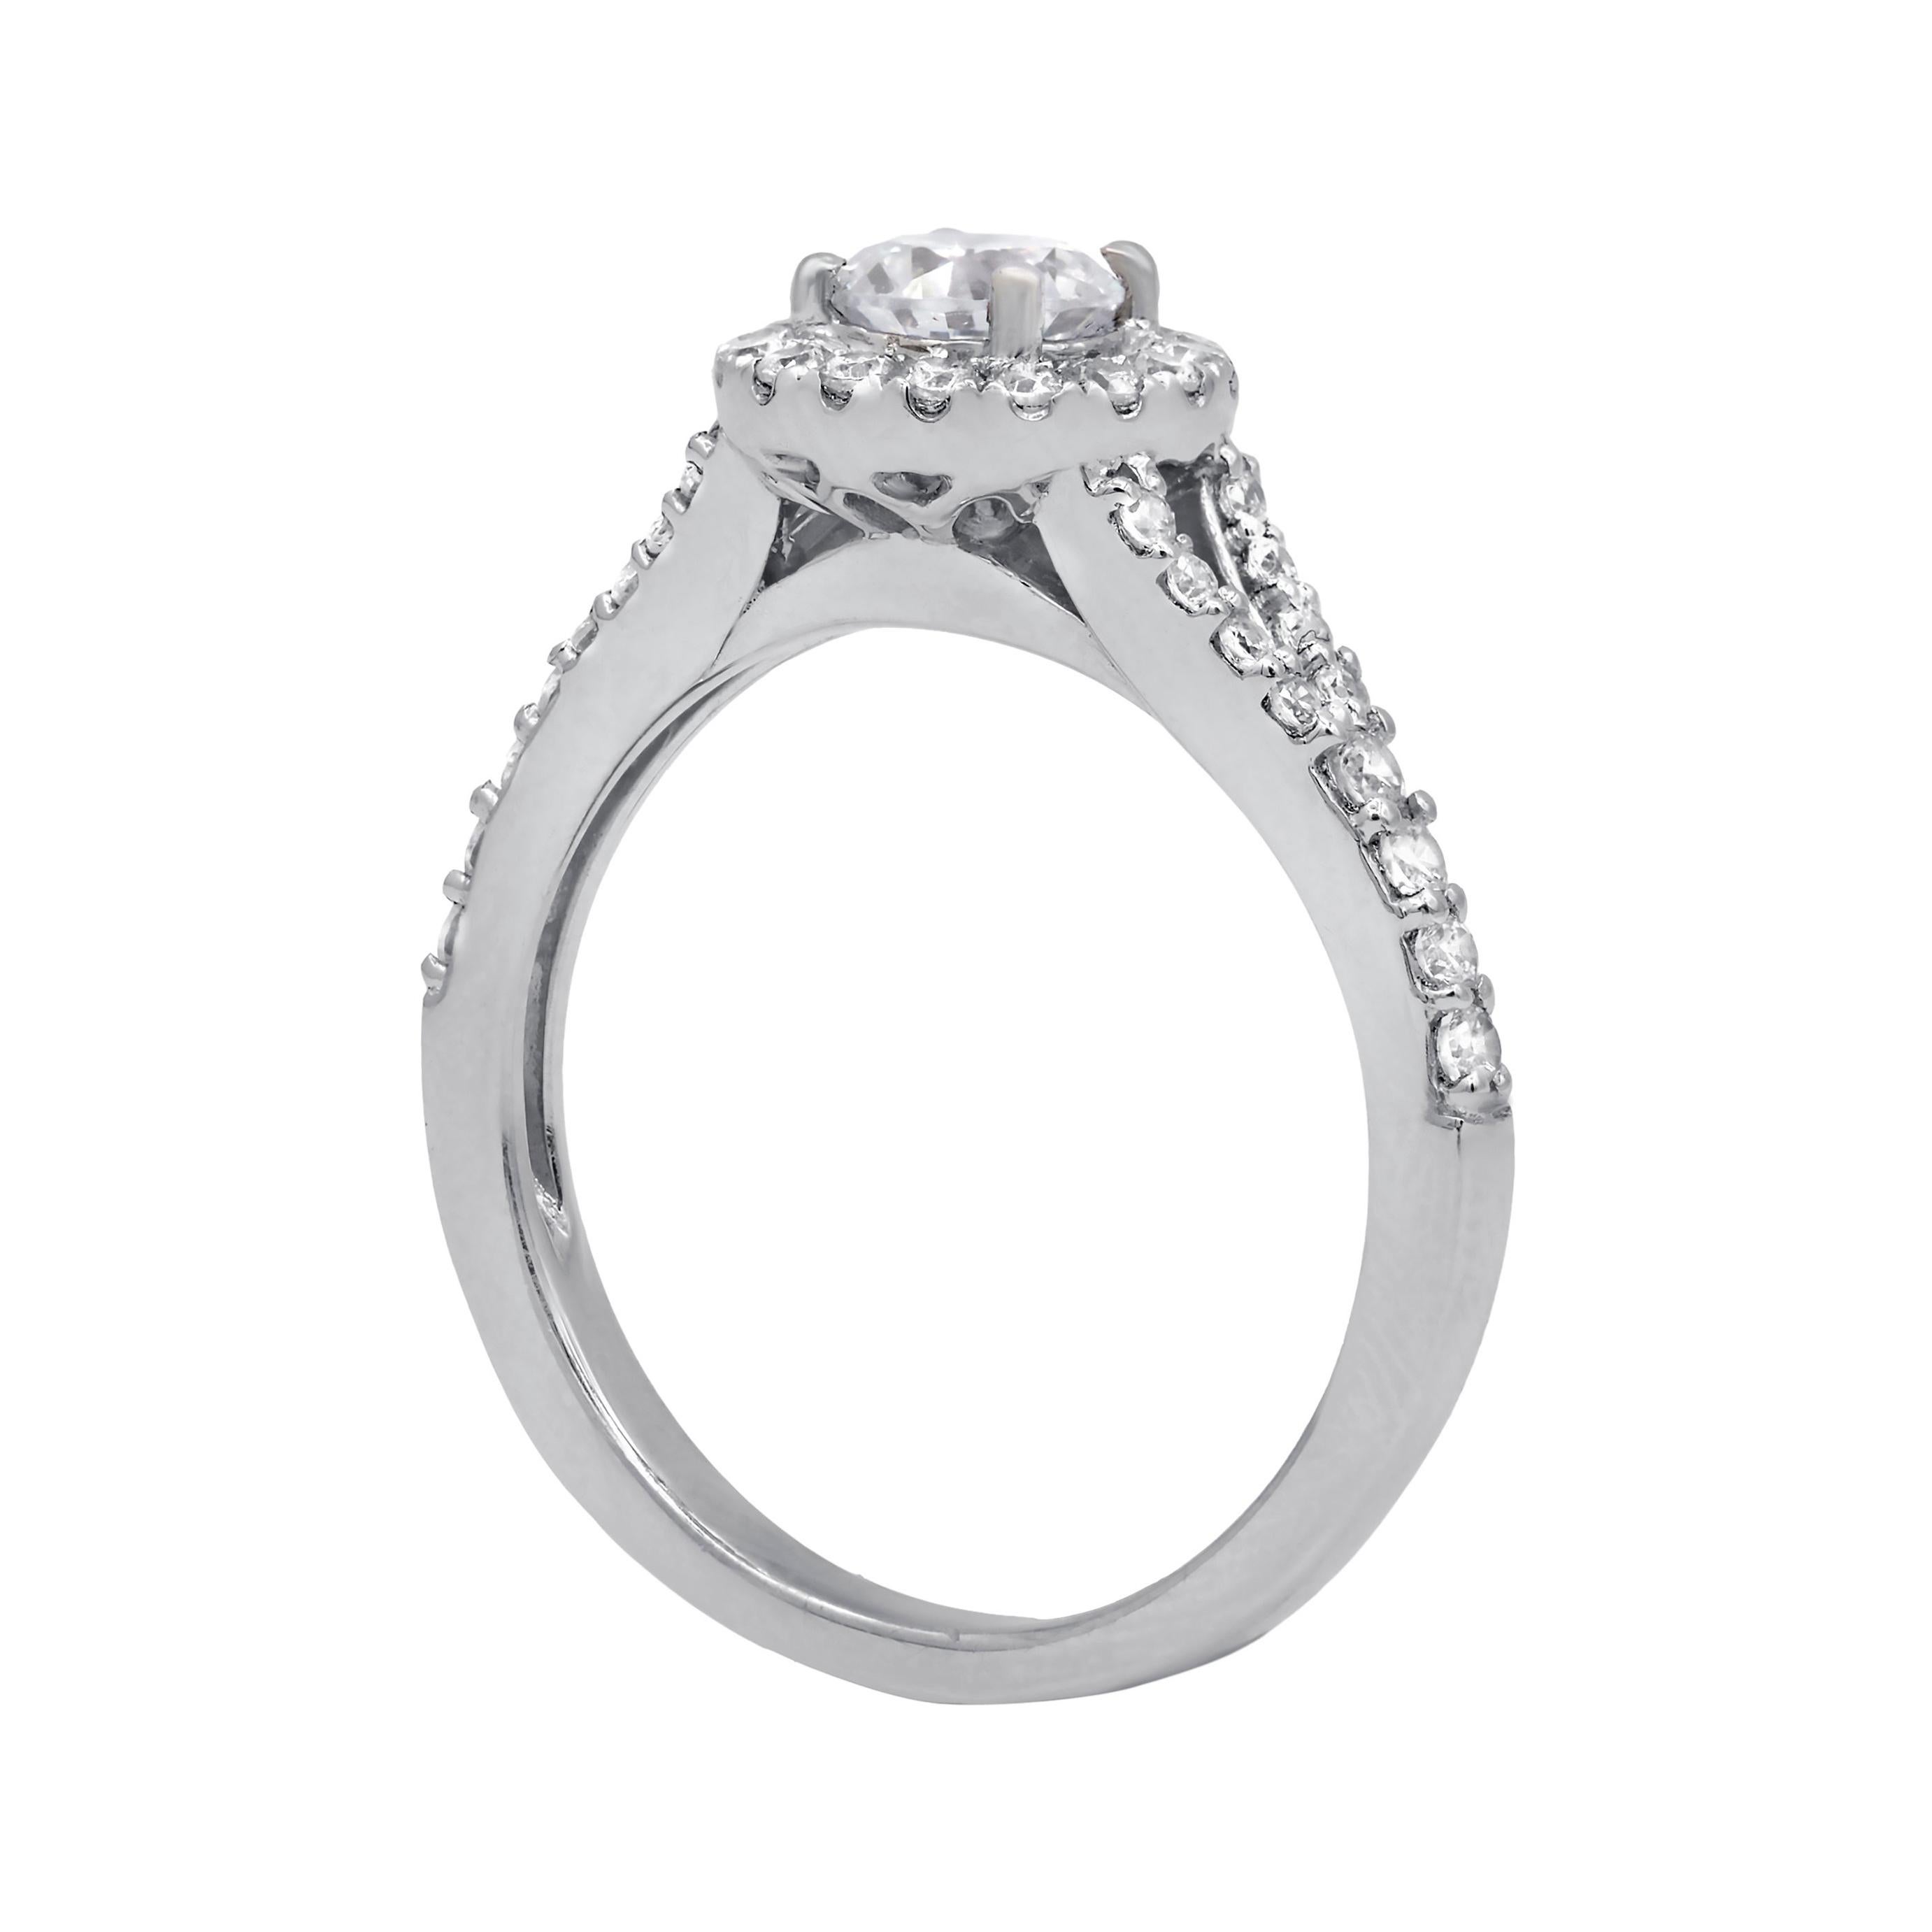 14kt diamond ring center .35ct round shape diamond in a halo and split shank setting .55cts of diamonds
